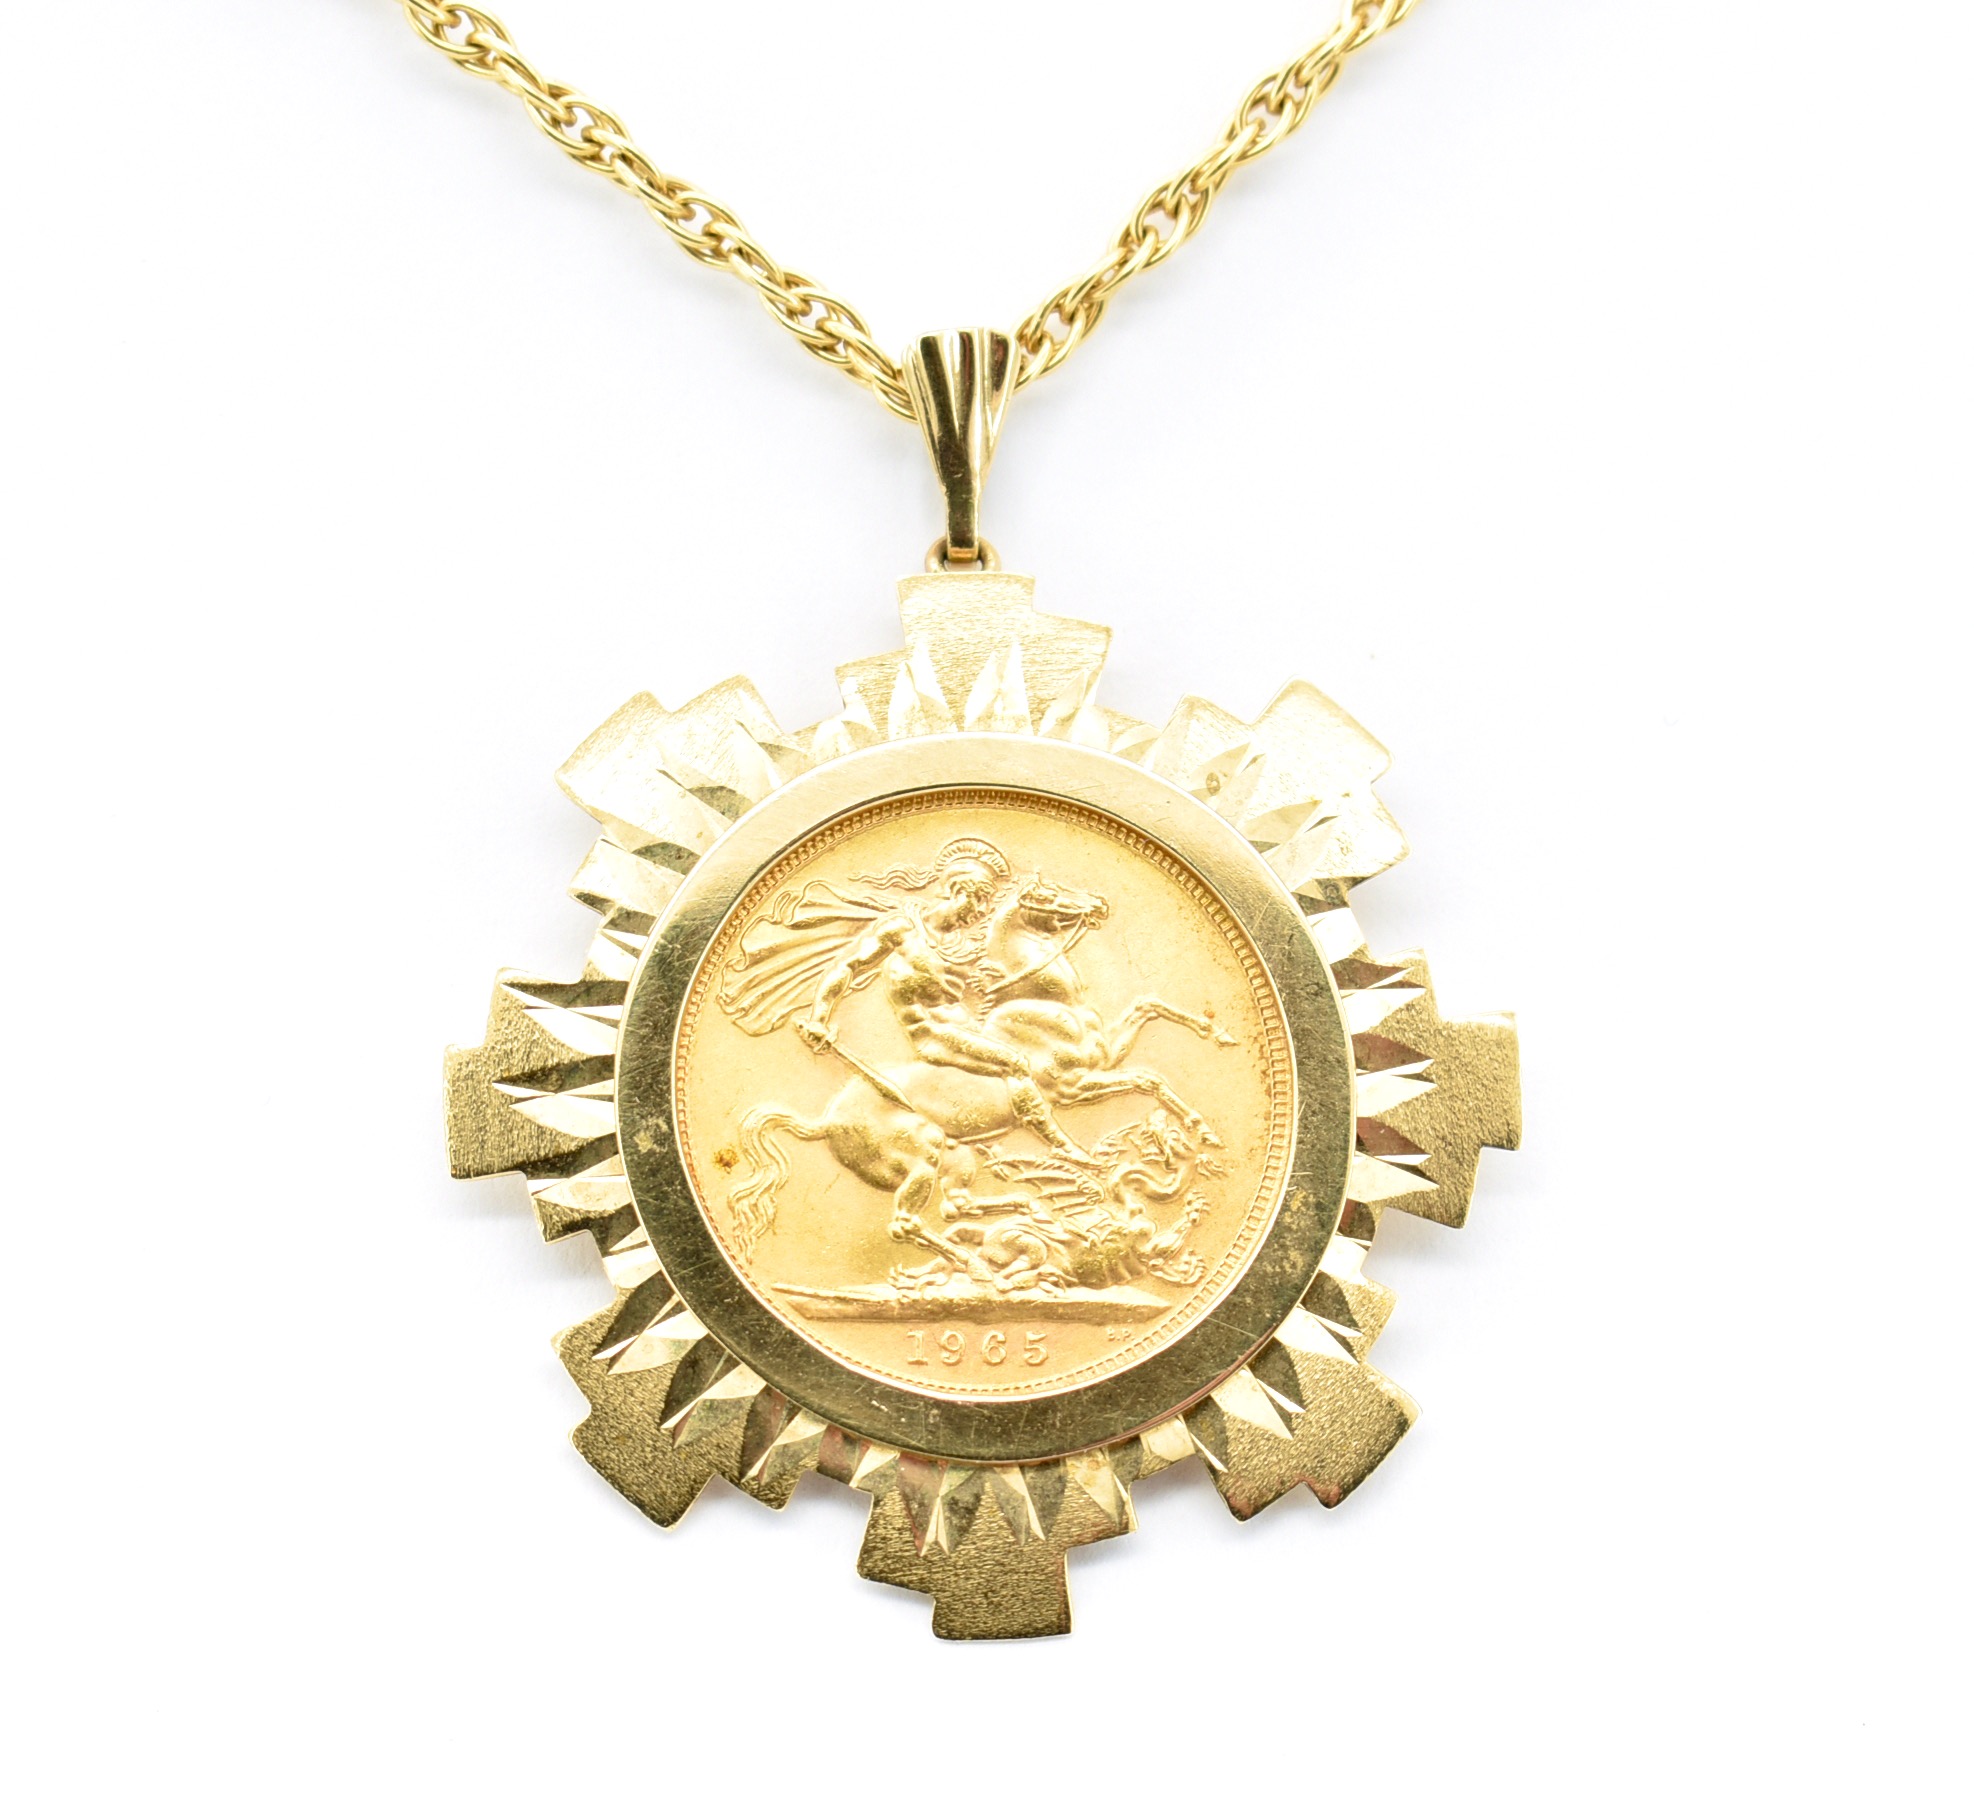 MOUNTED 1965 FULL GOLD SOVEREIGN PENDANT NECKLACE